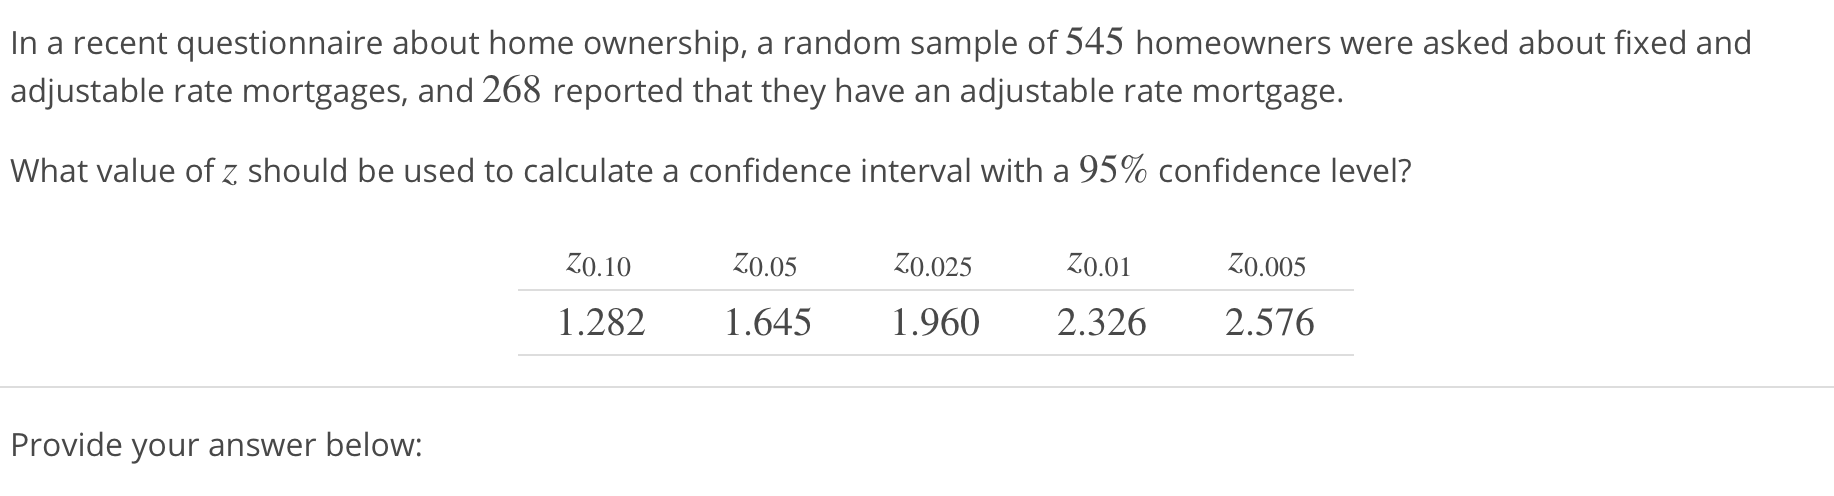 In a recent questionnaire about home ownership, a random sample of 545 homeowners were asked about fixed and
adjustable rate mortgages, and 268 reported that they have an adjustable rate mortgage.
What value of z should be used to calculate a confidence interval with a 95% confidence level?
ζ0.10 Ζ0.05 Ζ0.025 Ζ0.01 Ζ0.005
1.282 1.645 1.960 2.326 2.576
Provide your answer below:
